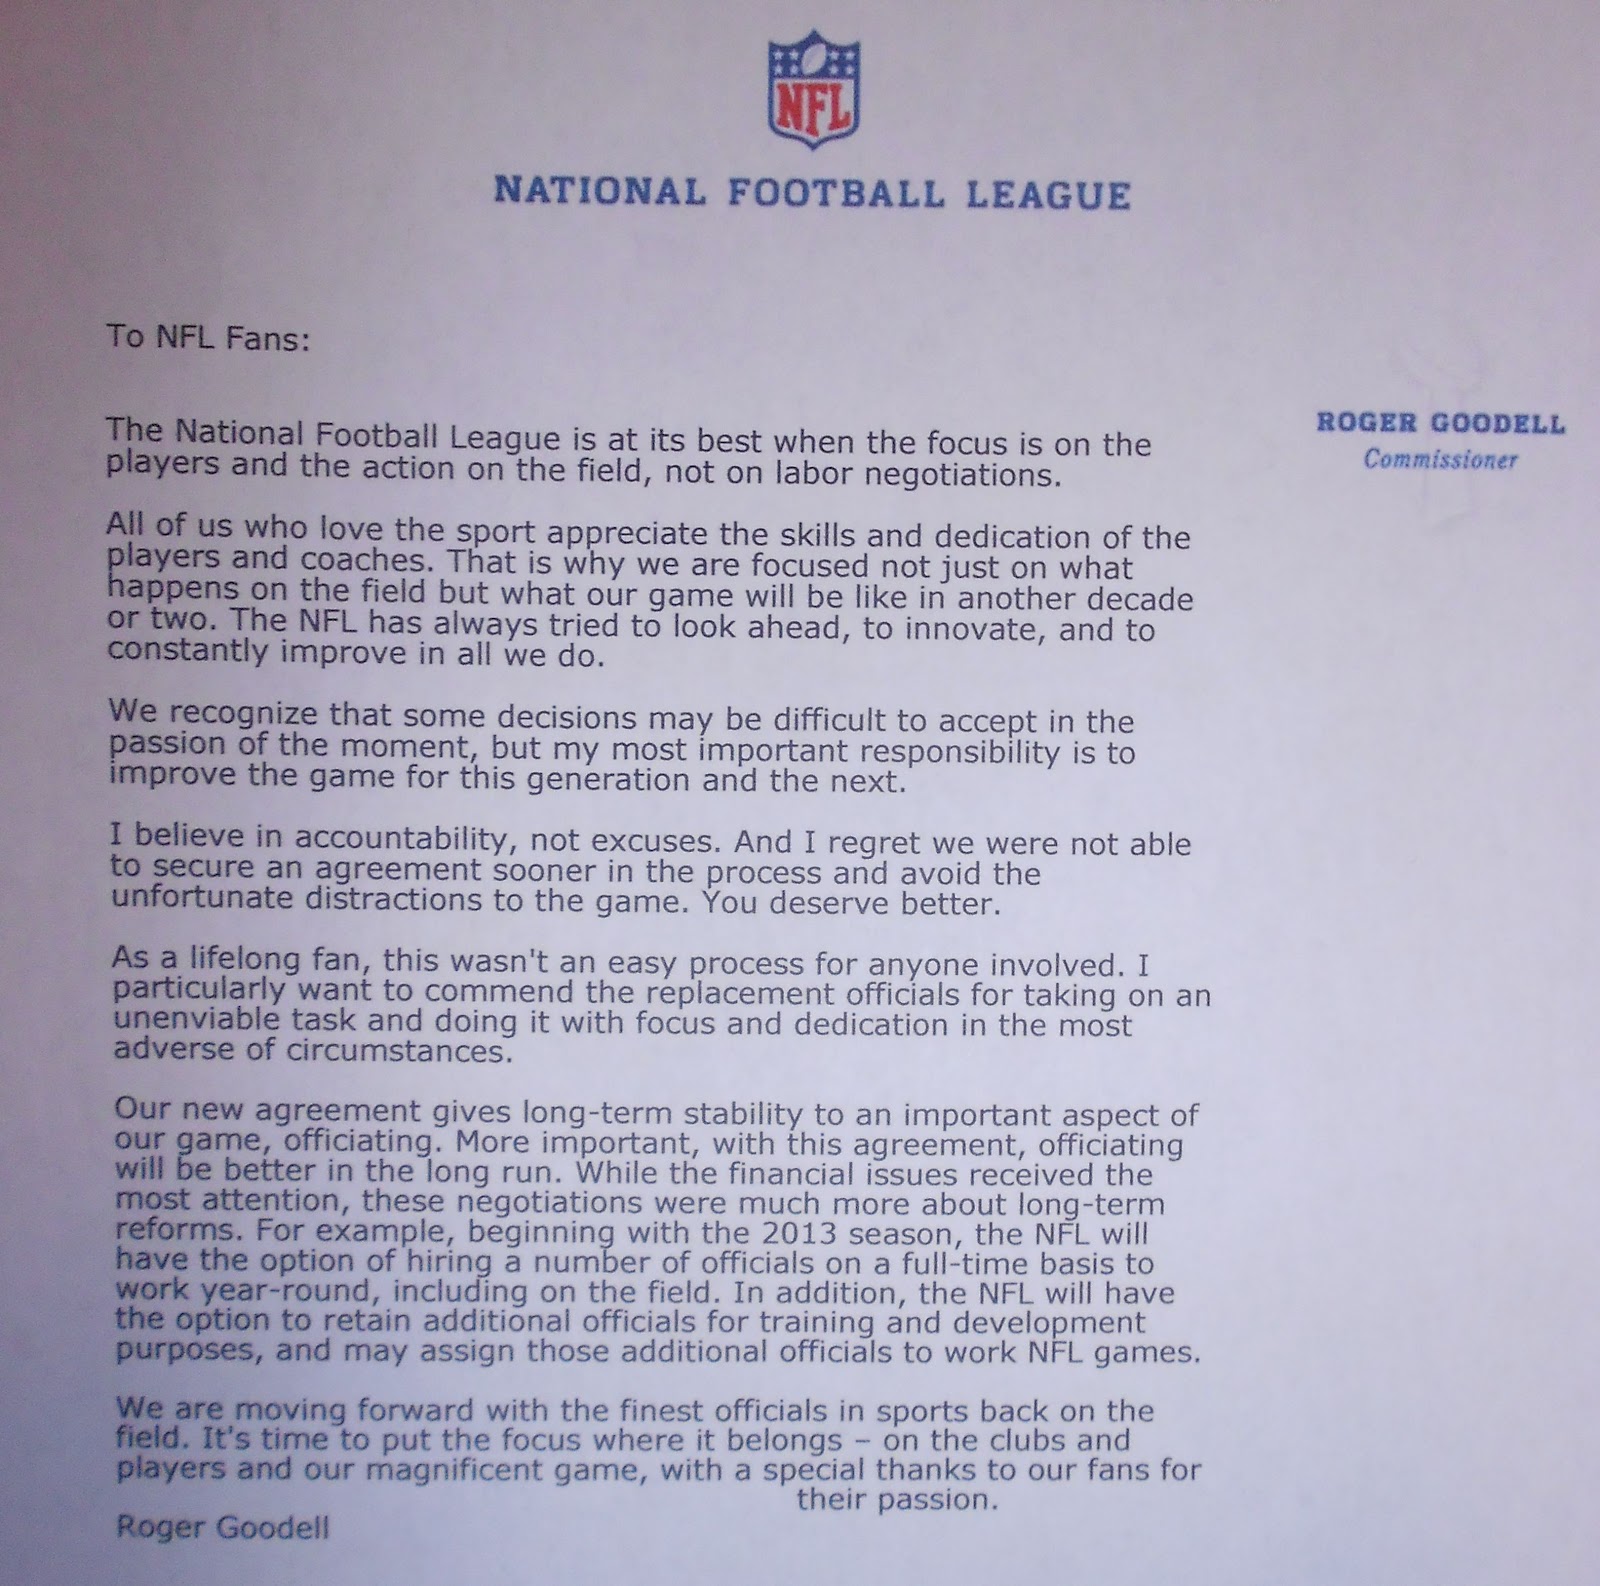 the other paper: NFL fans get apology letter from Roger Goodell